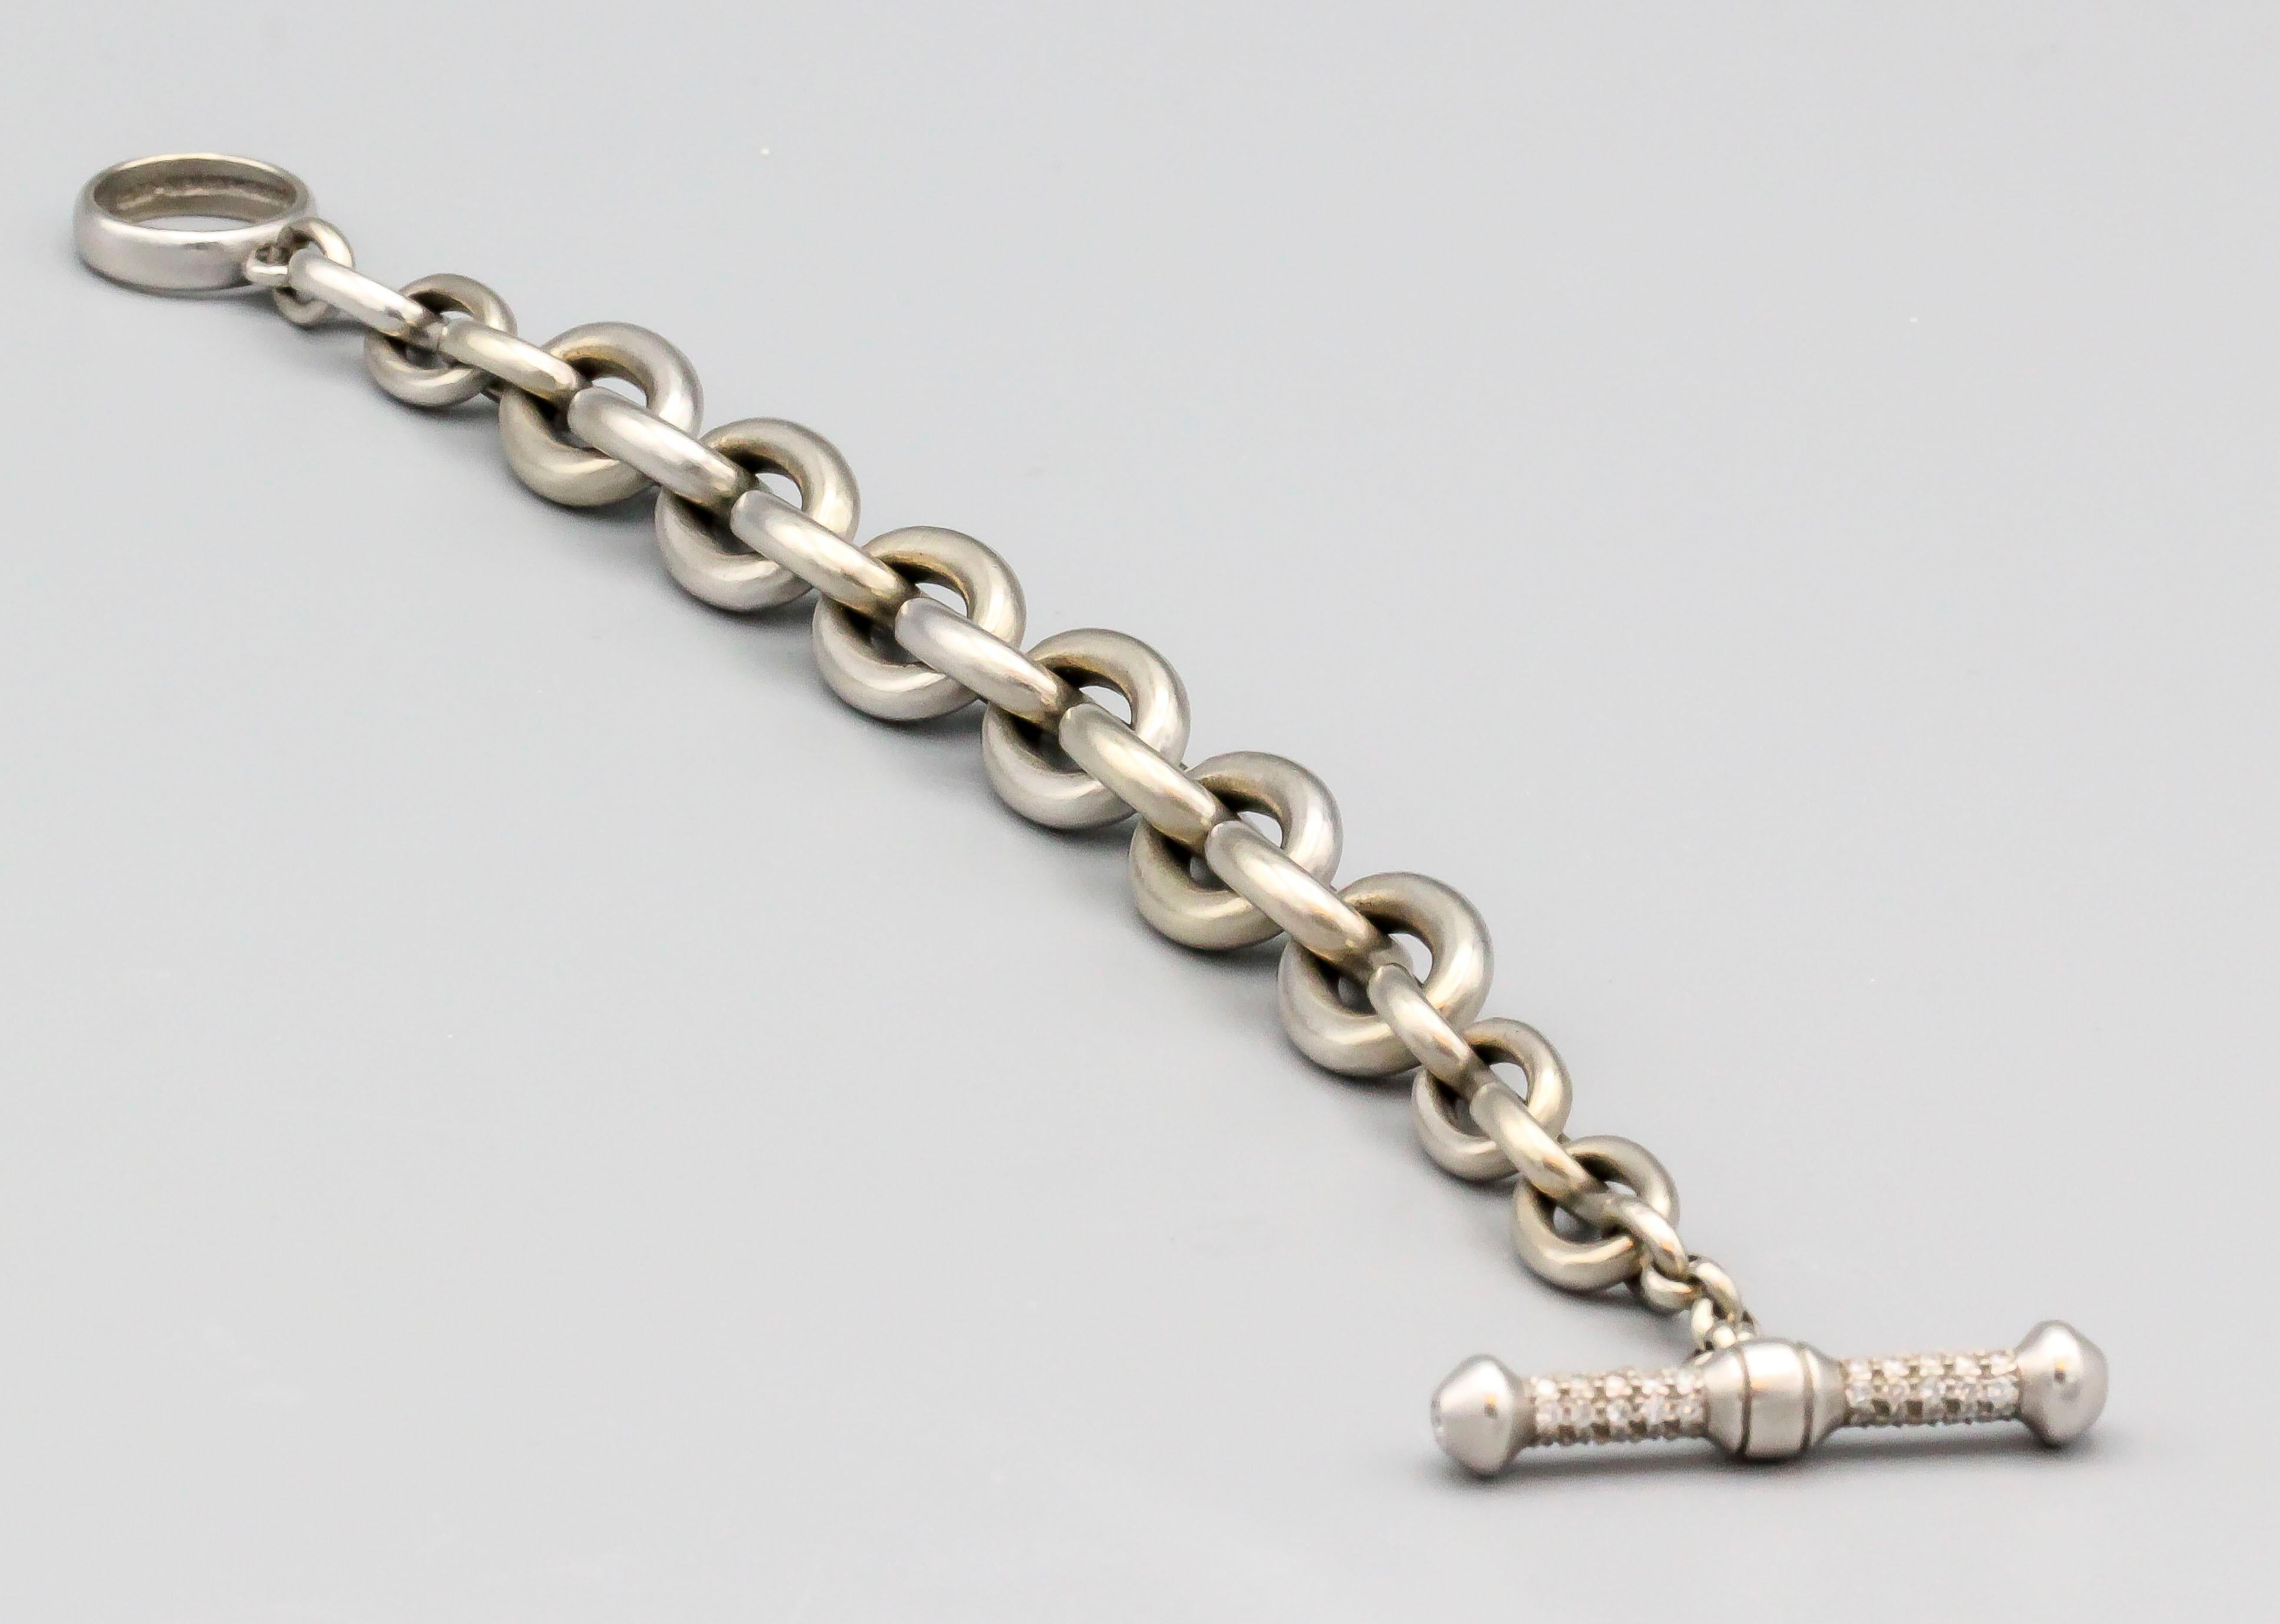 Fine diamond and 18k white gold toggle link bracelet by Kieselstein-Cord.  This bracelet features a stylish diamond encrusted toggle closure.  Total weight 91.2grams.

Hallmarks: Kieselstein-Cord, 750, 1984, maker's mark.